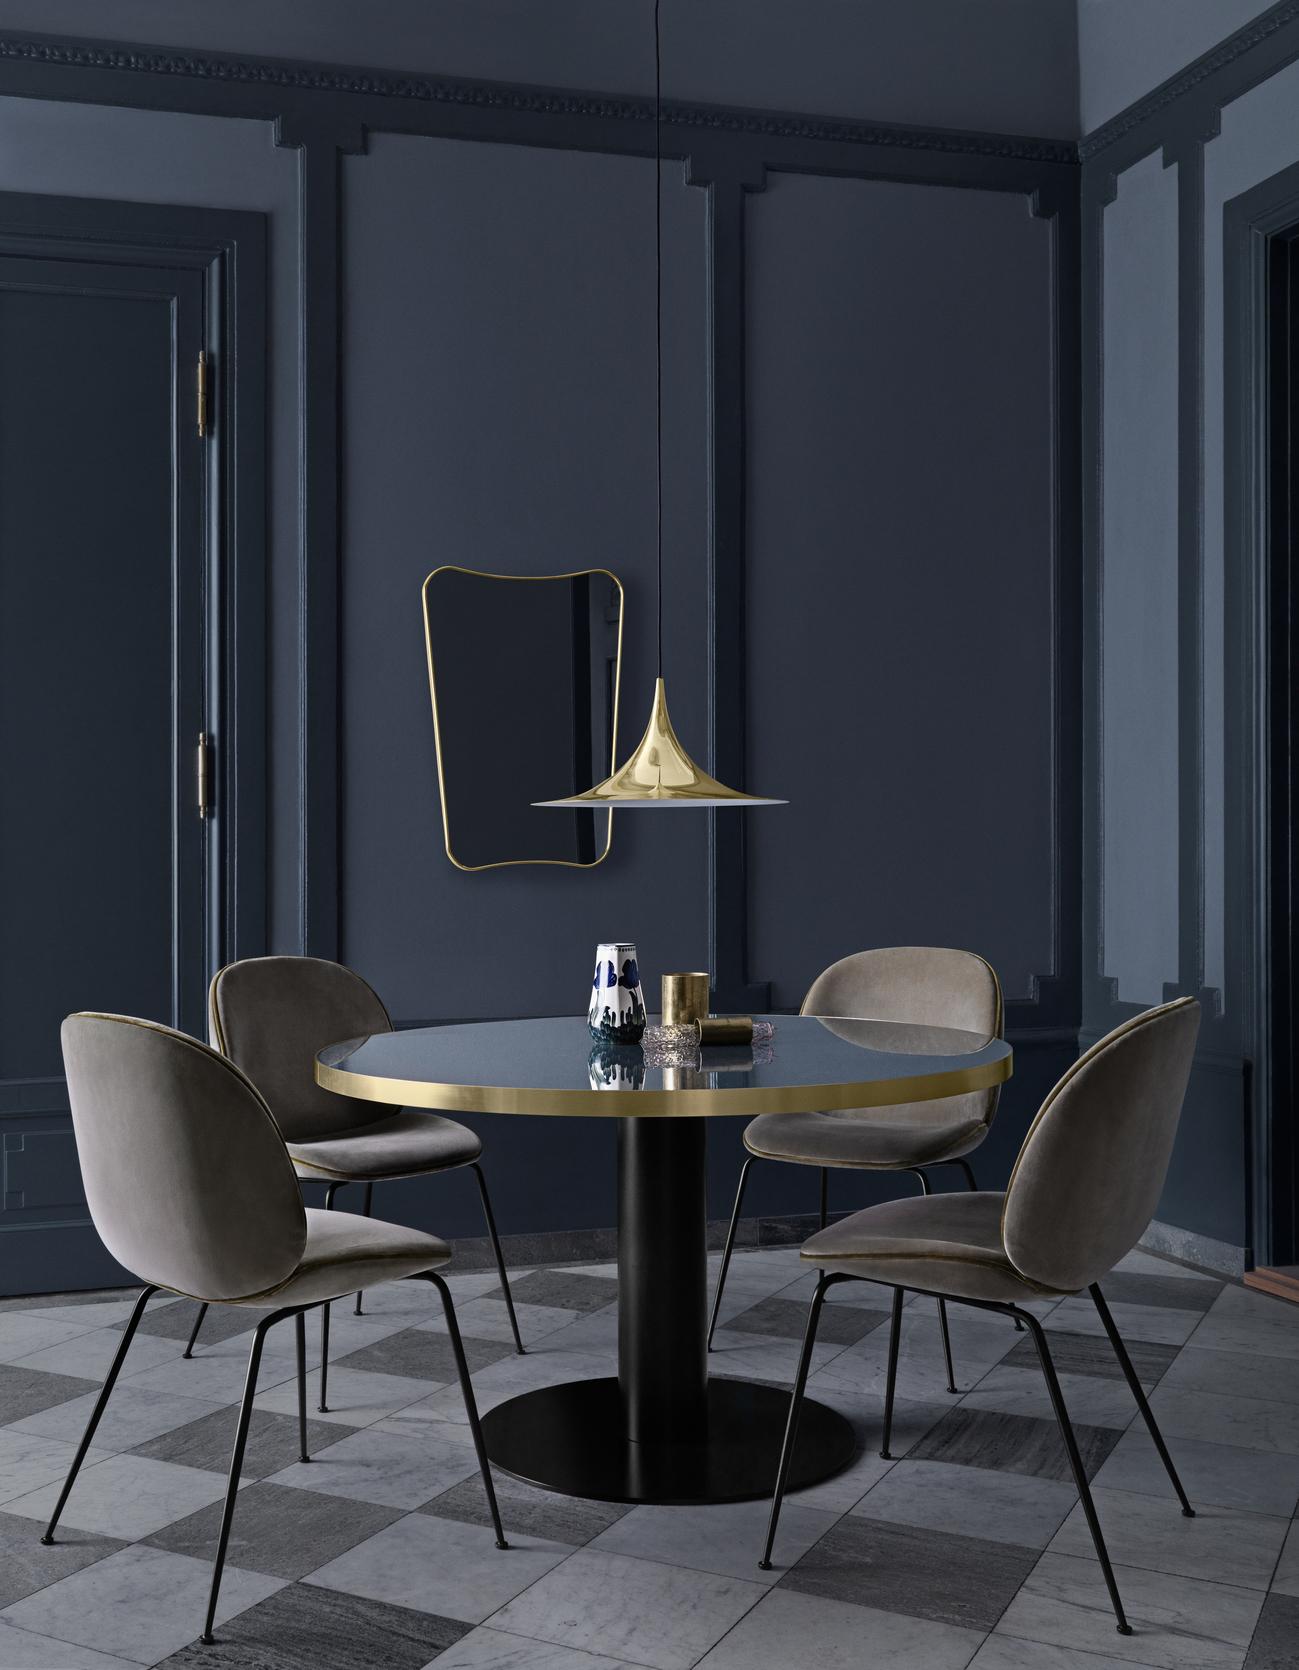 Large Bonderup and Thorup brass 'Semi' pendant. Designed in 1968 by Claus Bonderup and Torsten Thorup, this is an authorized re-edition by GUBI of Denmark who meticulously reproduces their work with scrupulous attention to detail and materials that